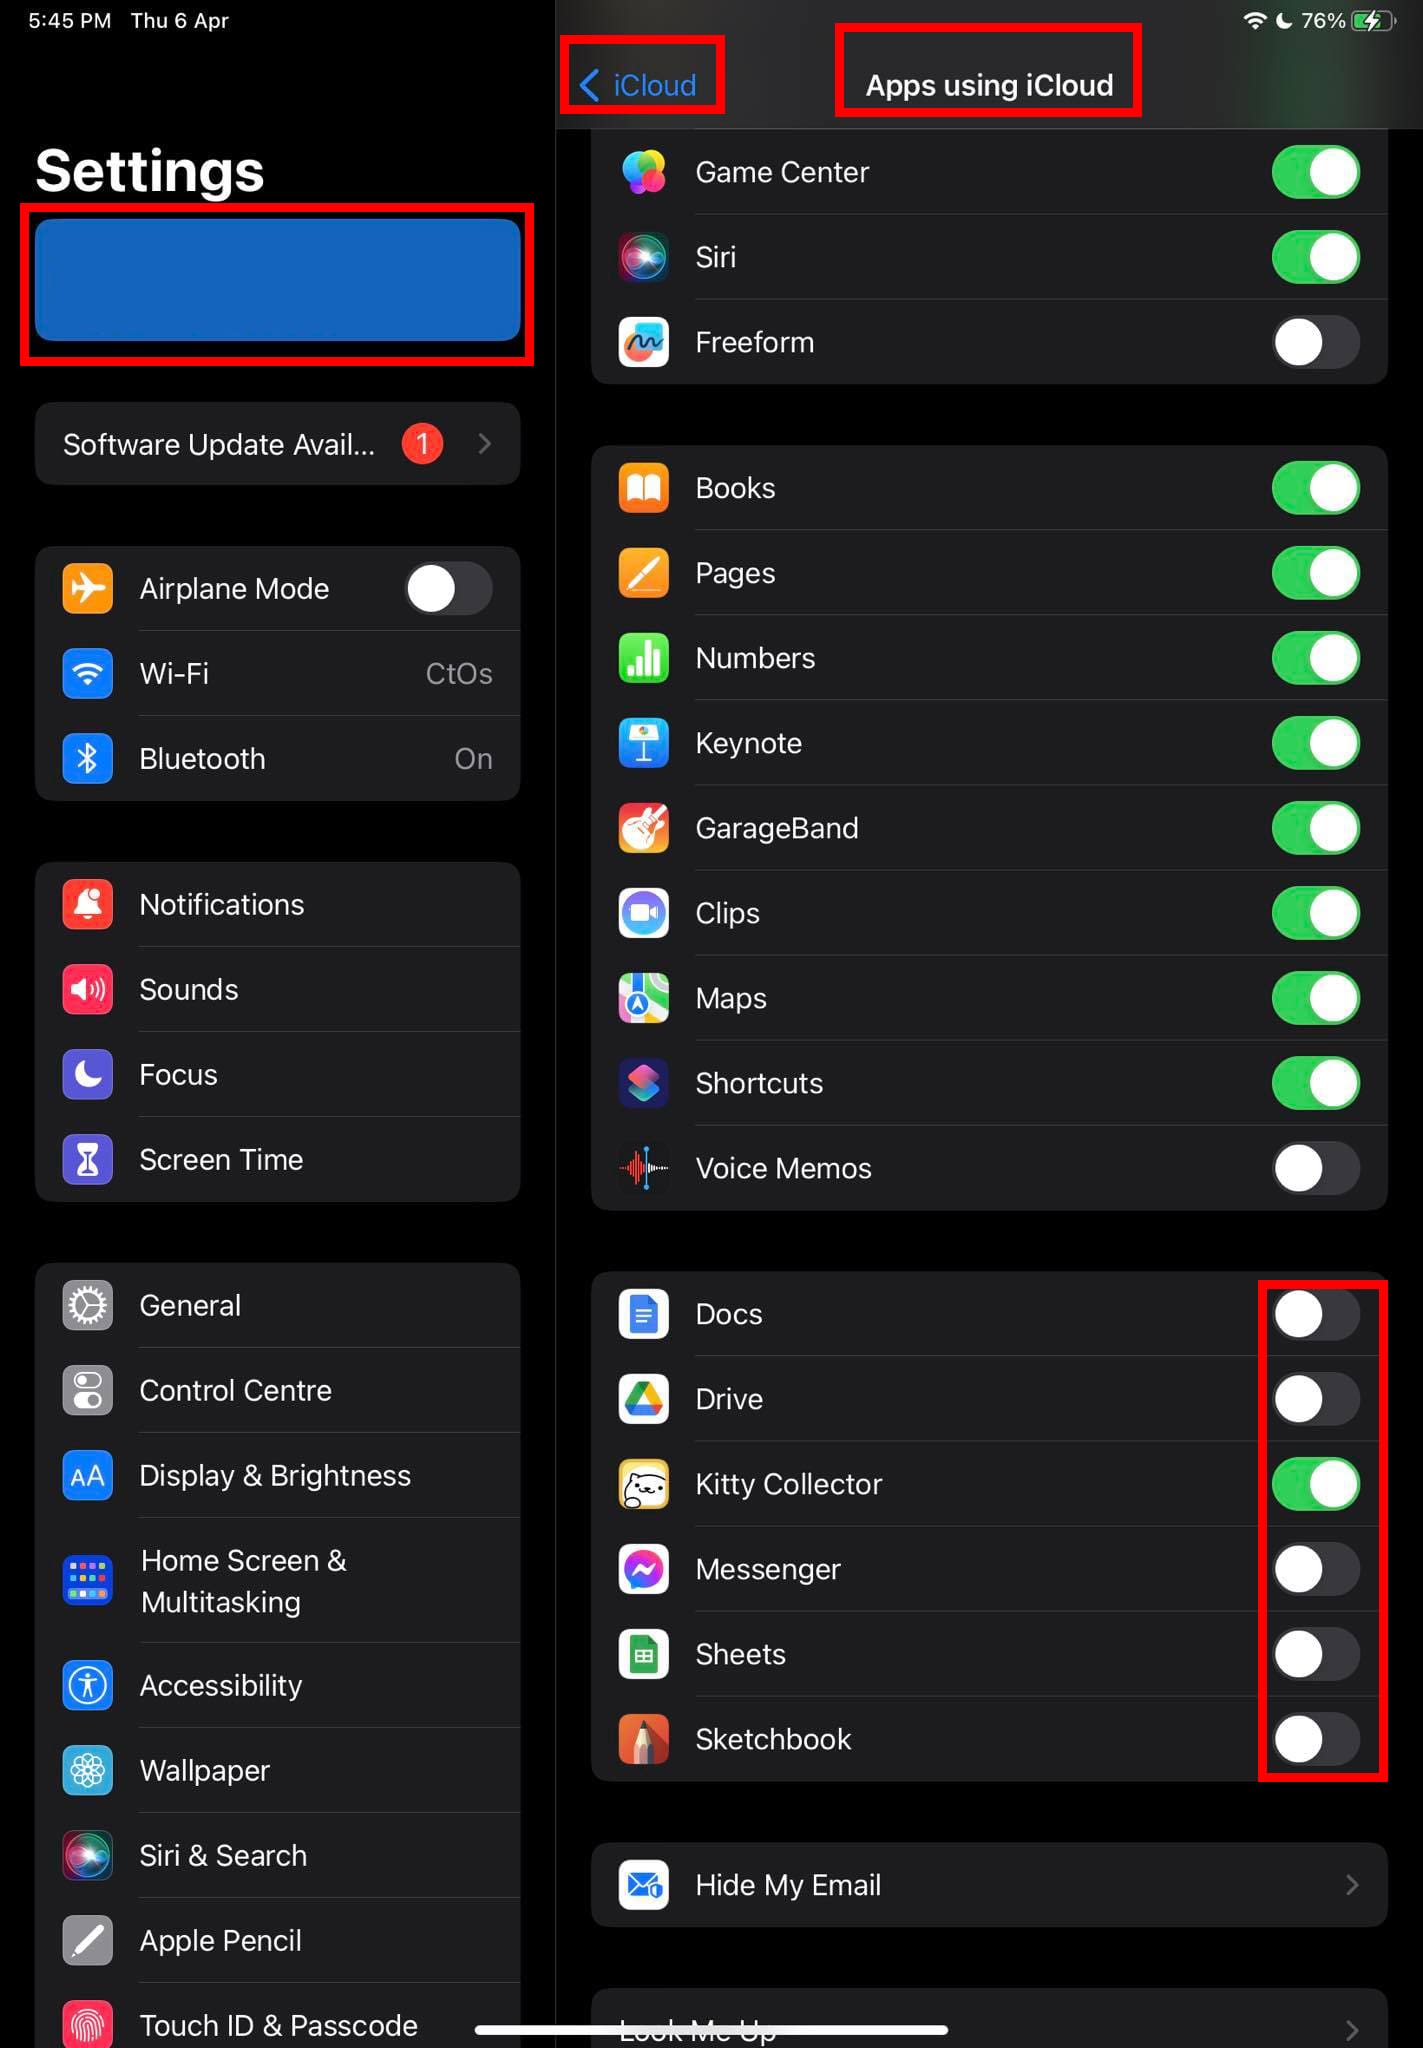 Find how you can use iCloud to disable iCloud backup for apps and save space